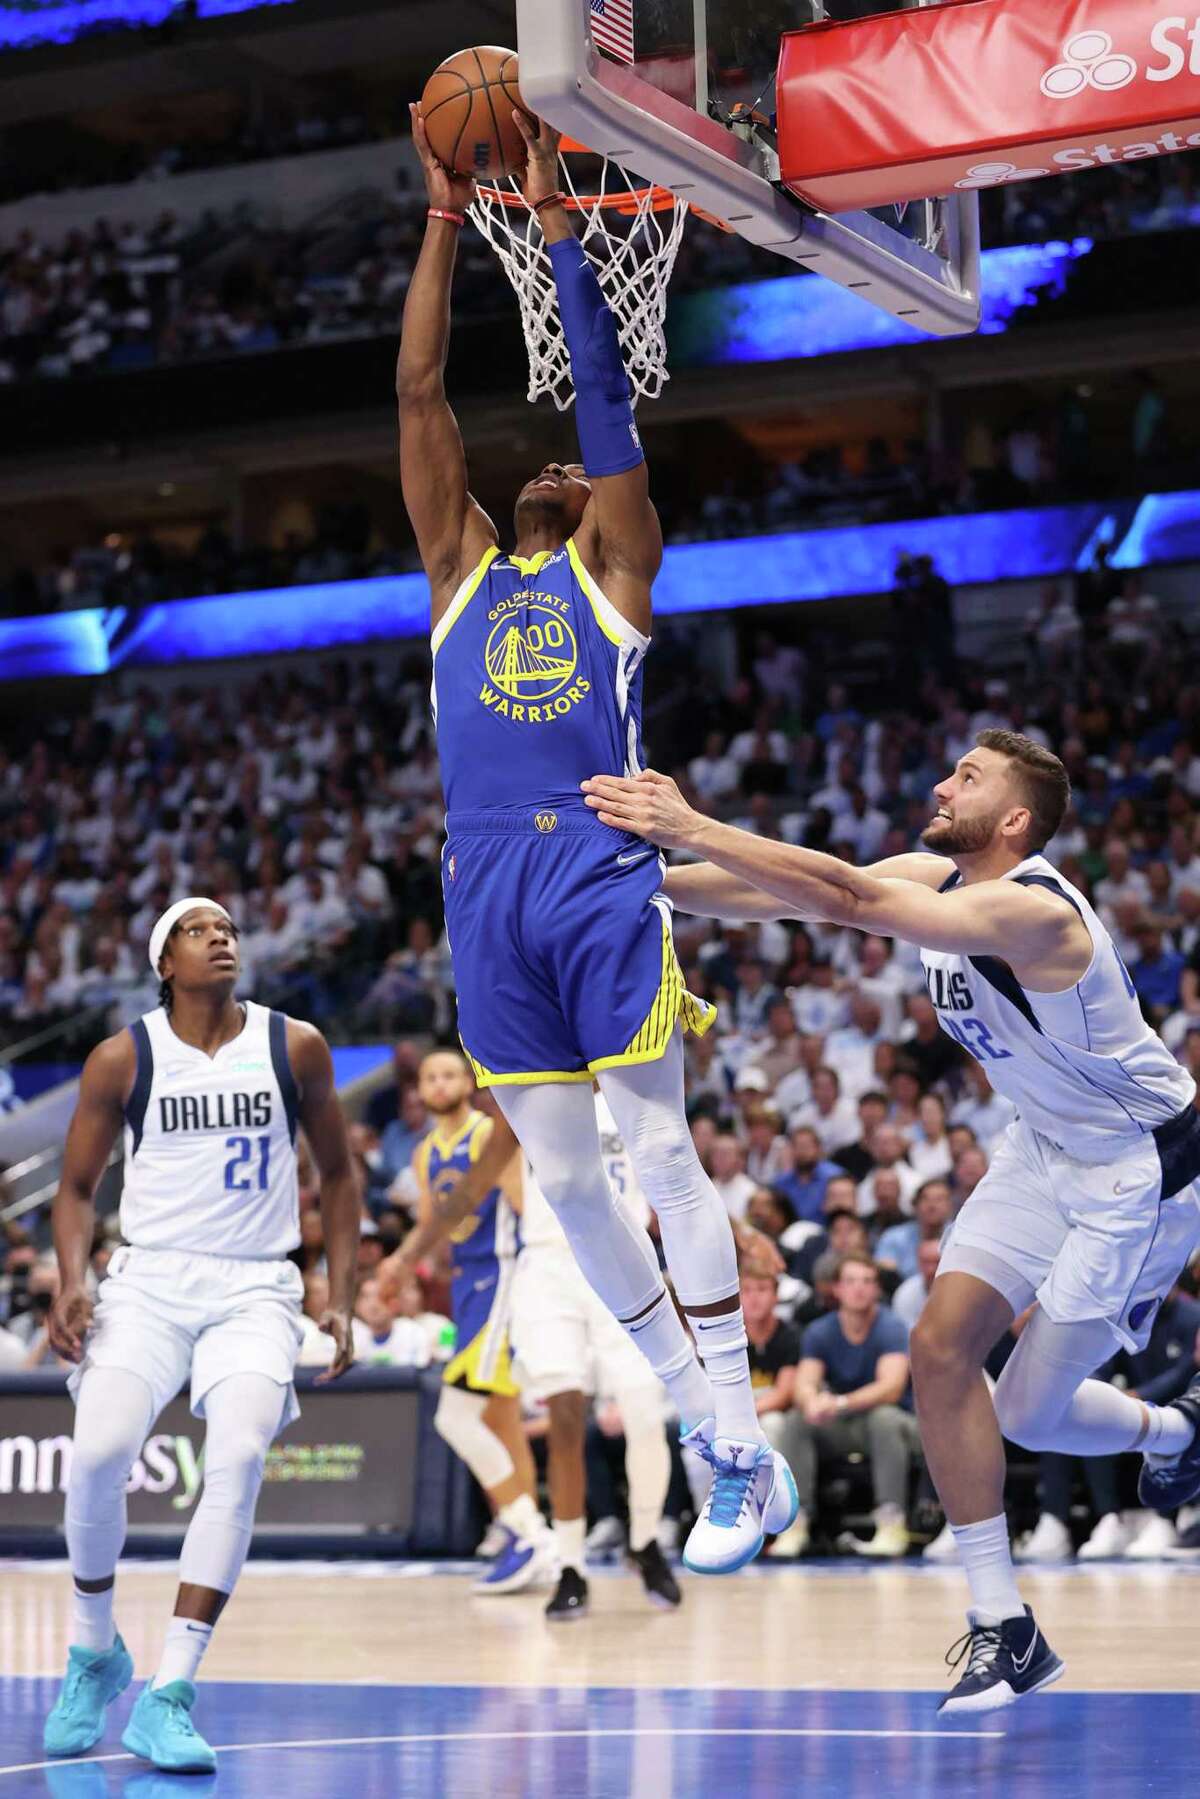 Golden State Warriors’ Jonathan Kuminga is fouled by Dallas Mavericks’ Maxi Kleber in 1st quarter of Game 4 of NBA Western Conference Finals at American Airlines Center in Dallas, Texas, on Tuesday, May 24, 2022.